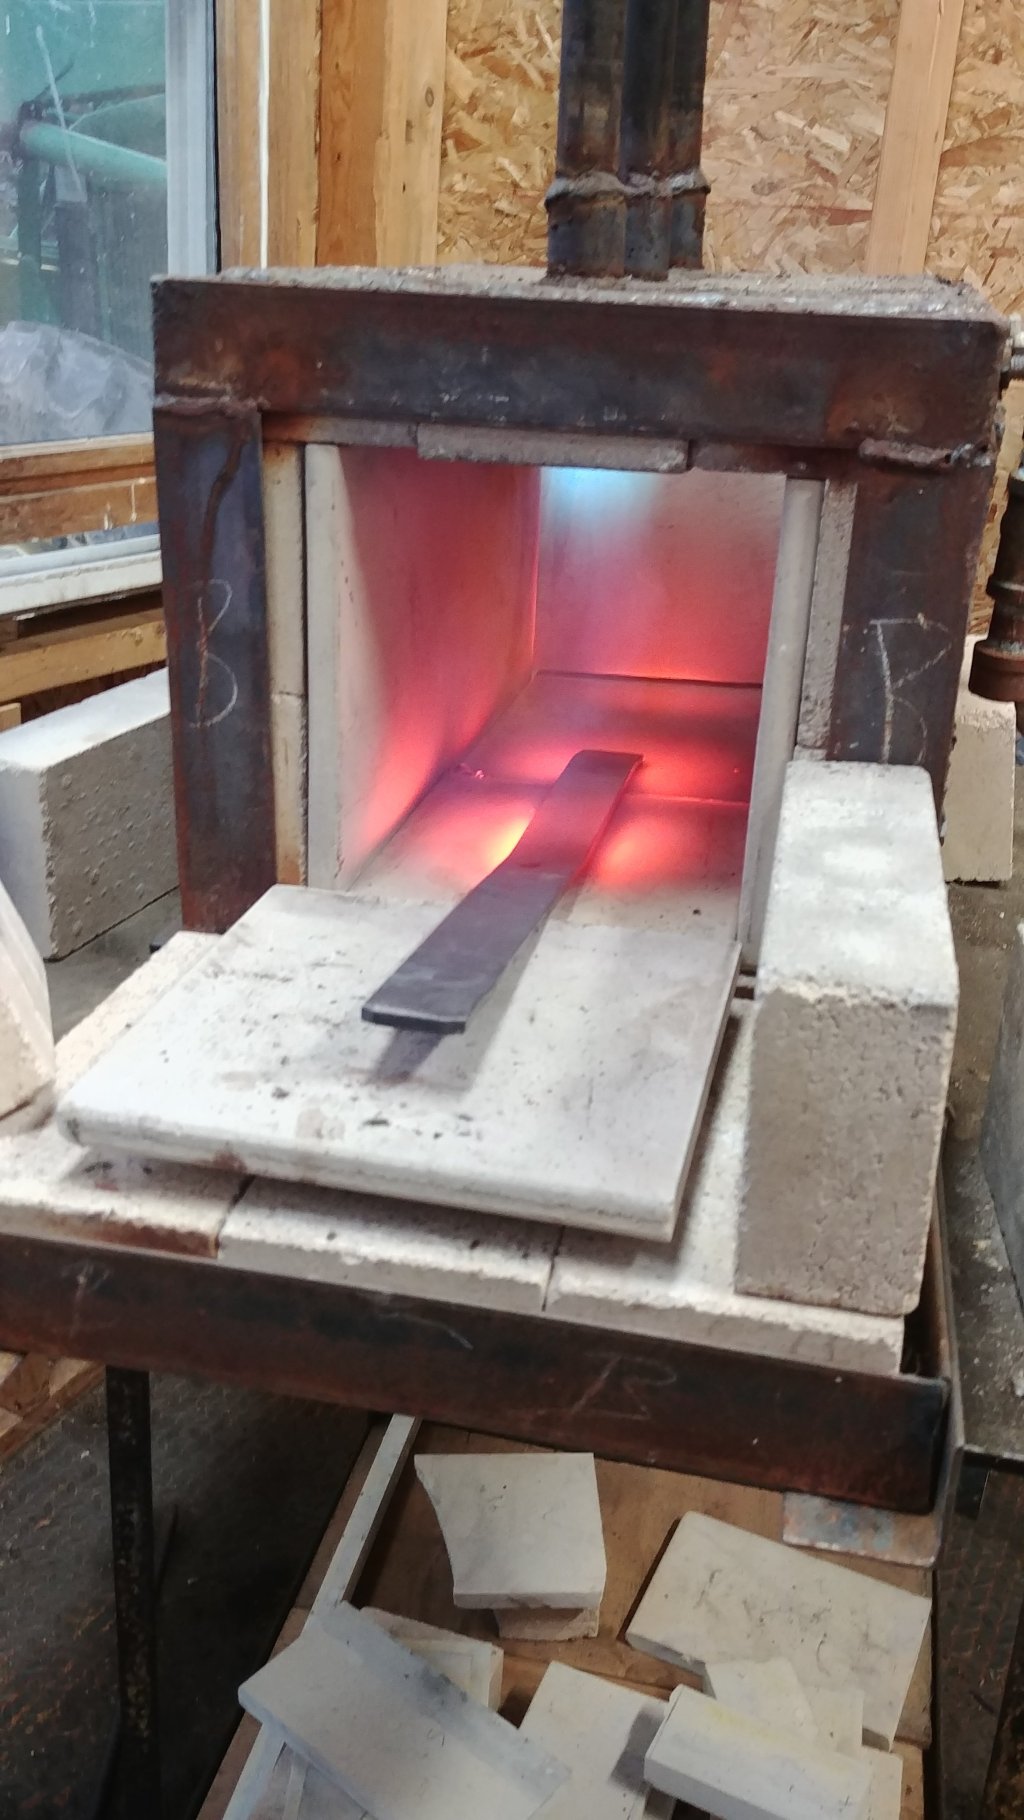 Troubleshooting Common Issues in a Coal Forge: Tips for Efficient Blacksmithing